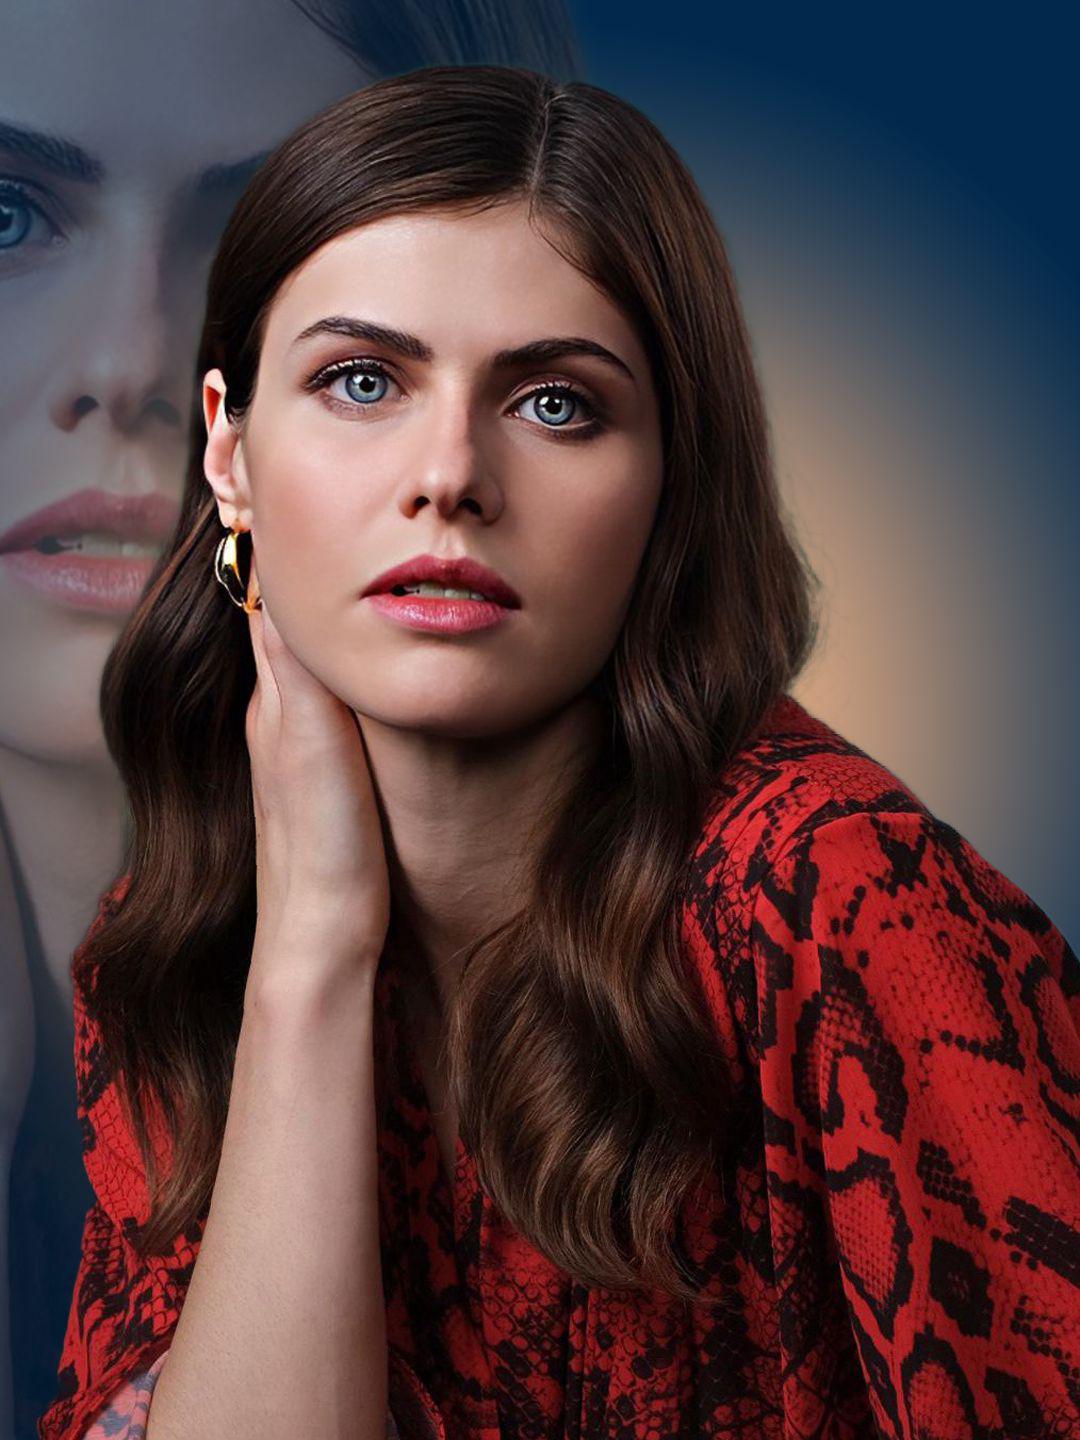 Bader Stier Xxx Sd - Alexandra Anna Daddario - Celeb ART - Beautiful Artworks of Celebrities,  Footballers, Politicians and Famous People in World | OpenSea